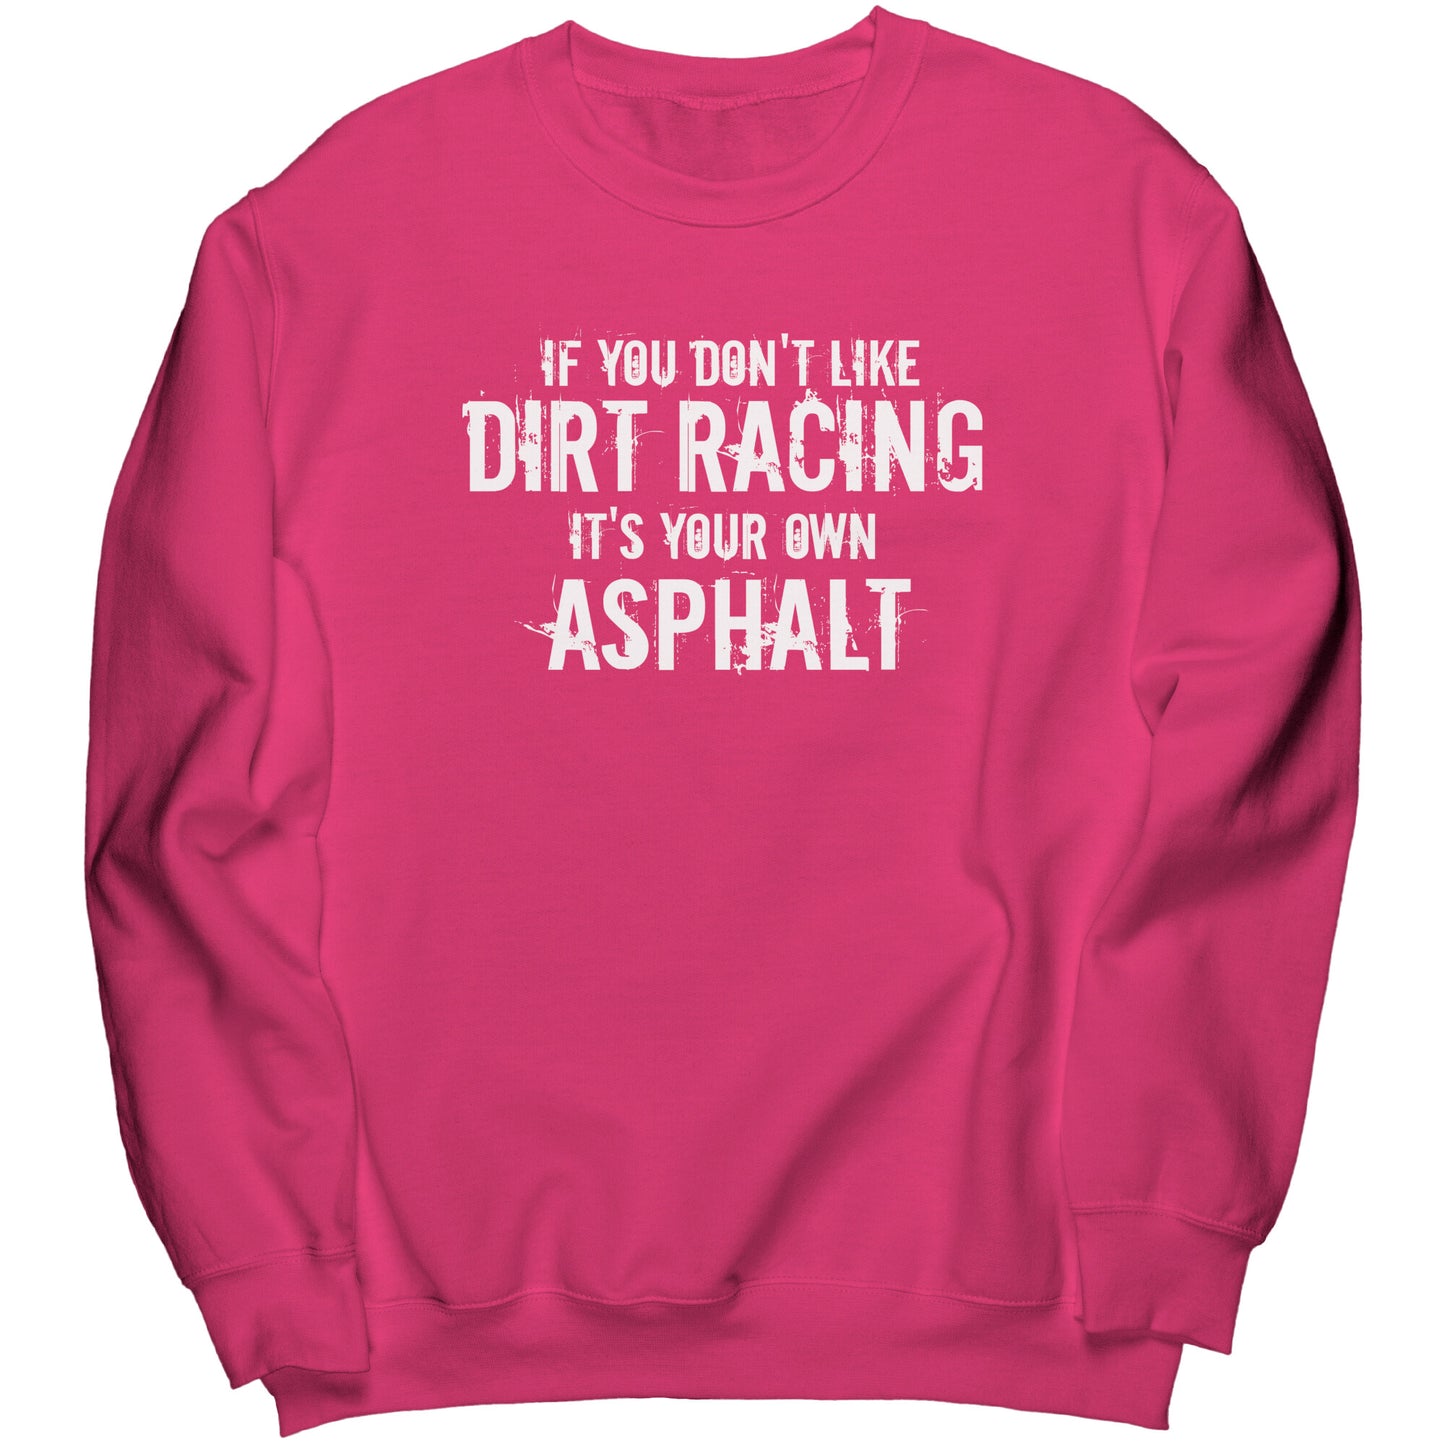 If You Don't Like Dirt Racing It's Your Own Asphalt Sweatshirt